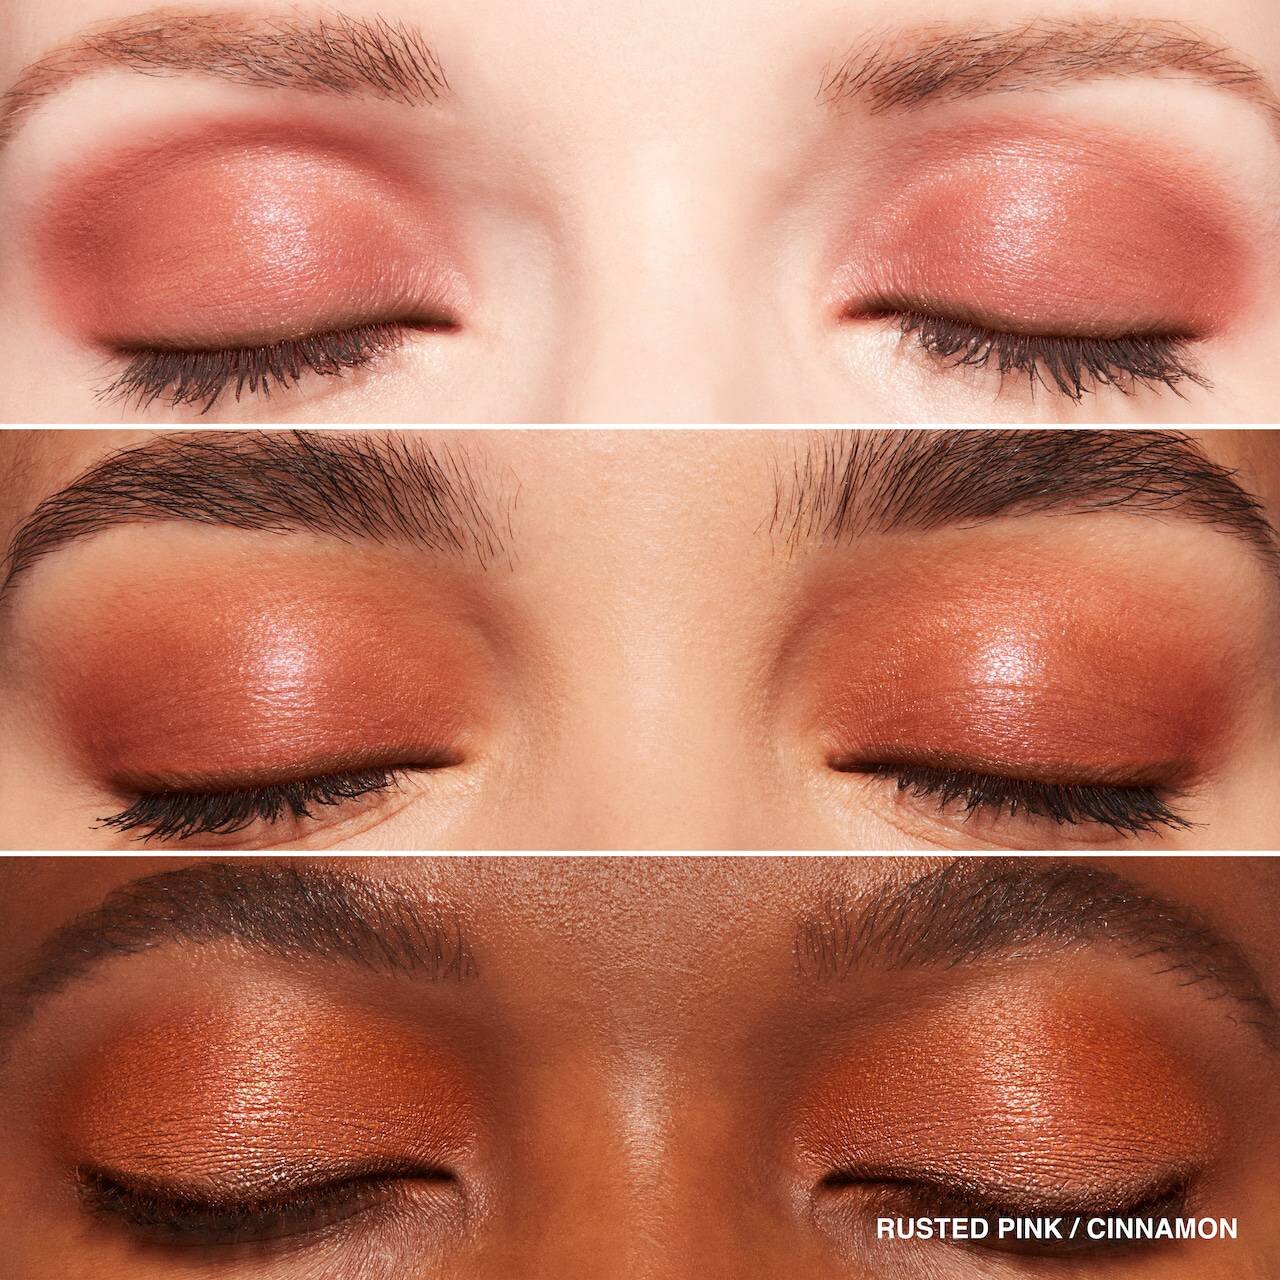 Golden Pink / Taupe Dual-Ended Long-Wear Waterproof Cream